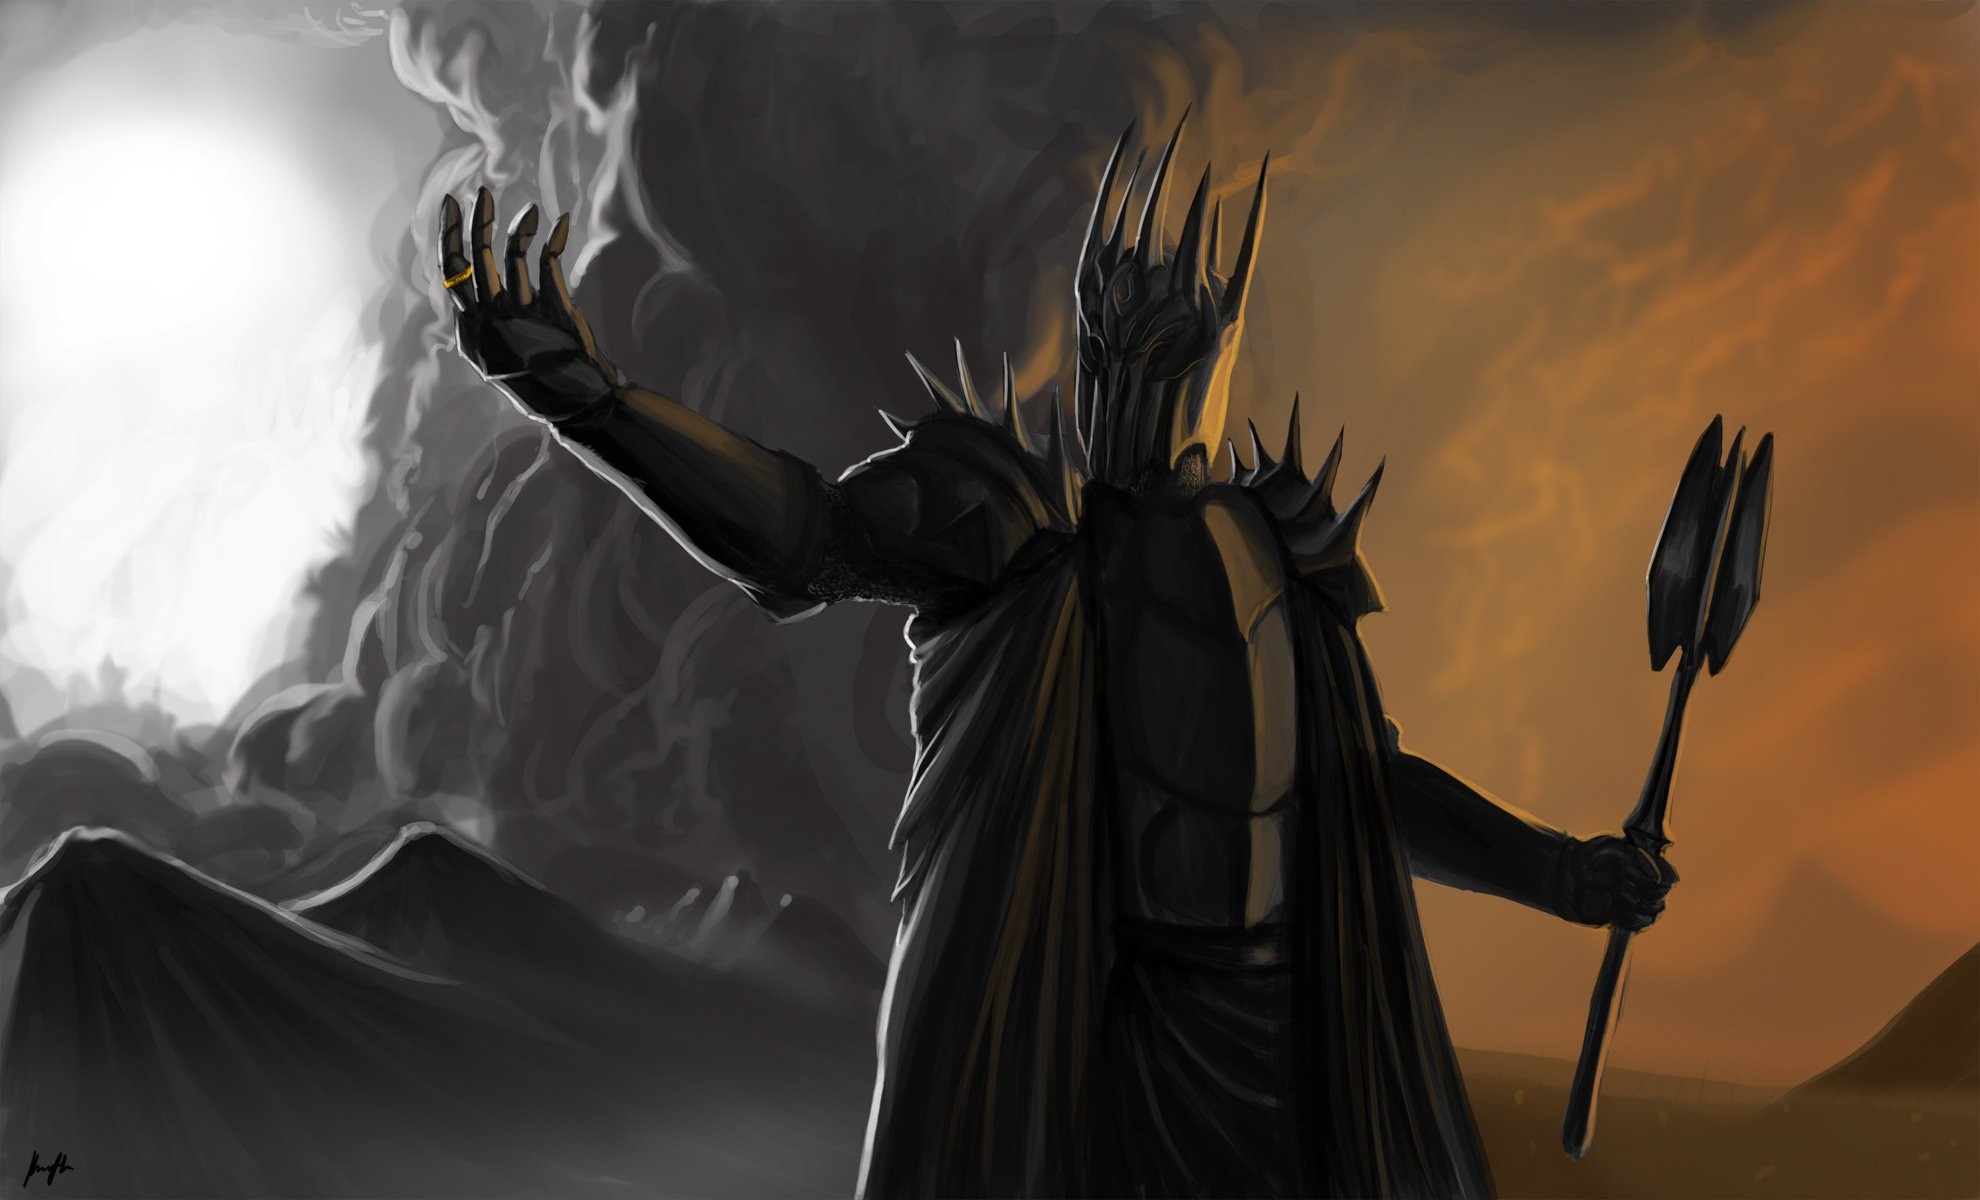 Sauron Lord Dark The Of Cool Image Background Arts